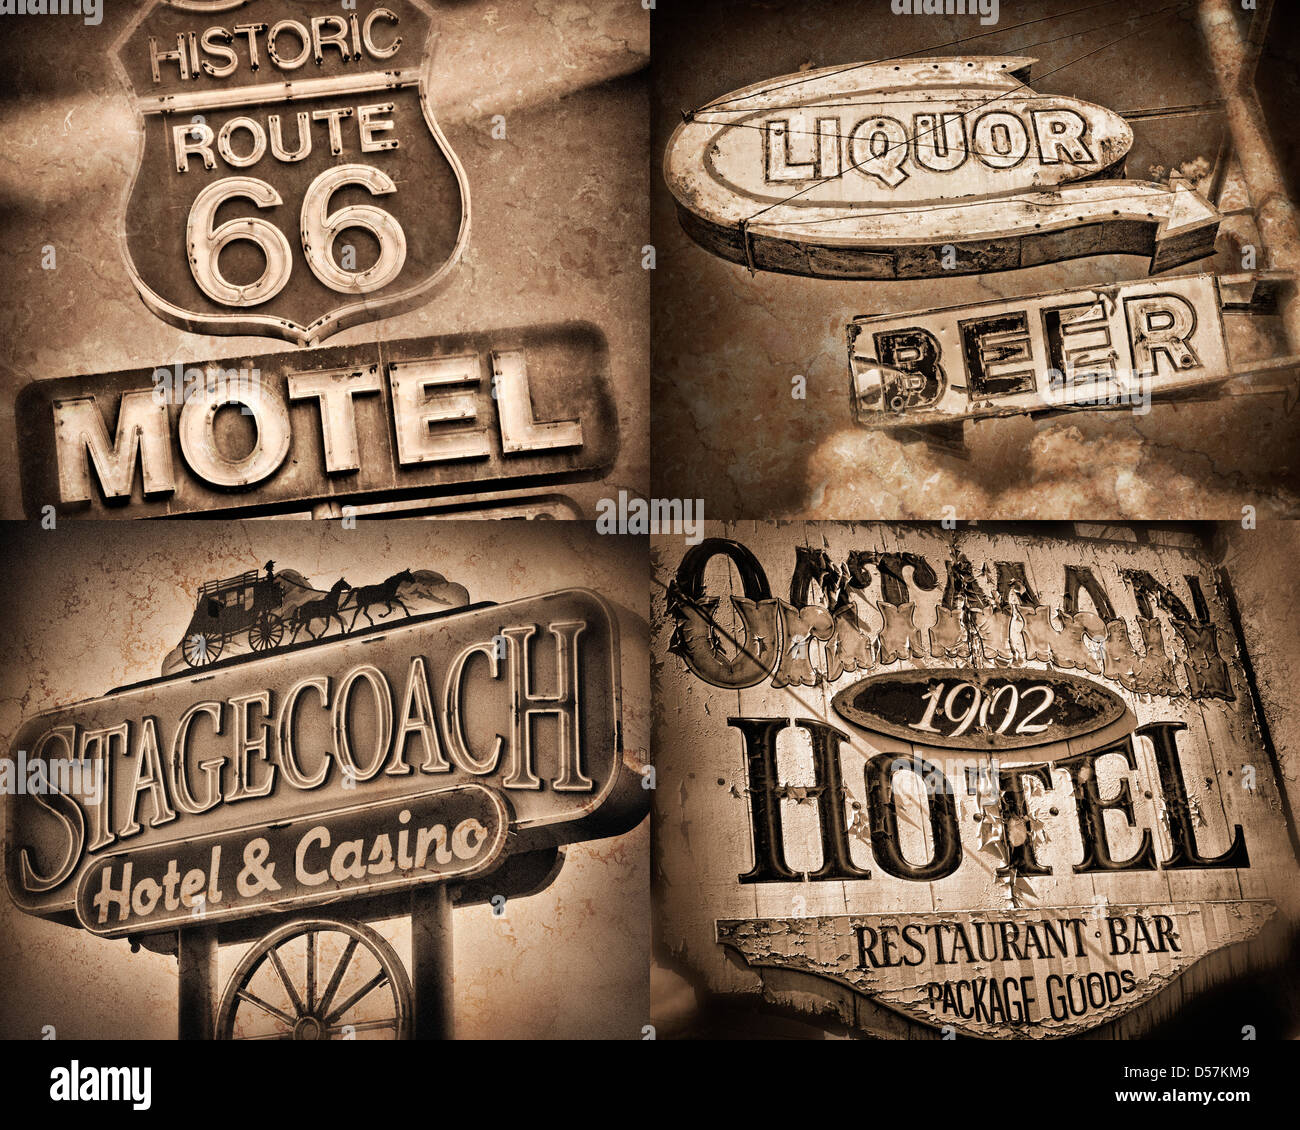 Four Signs composite “Route 66 Motel, Liquor-Beer,  Oatman Motel, Stagecoach Motel” Stock Photo